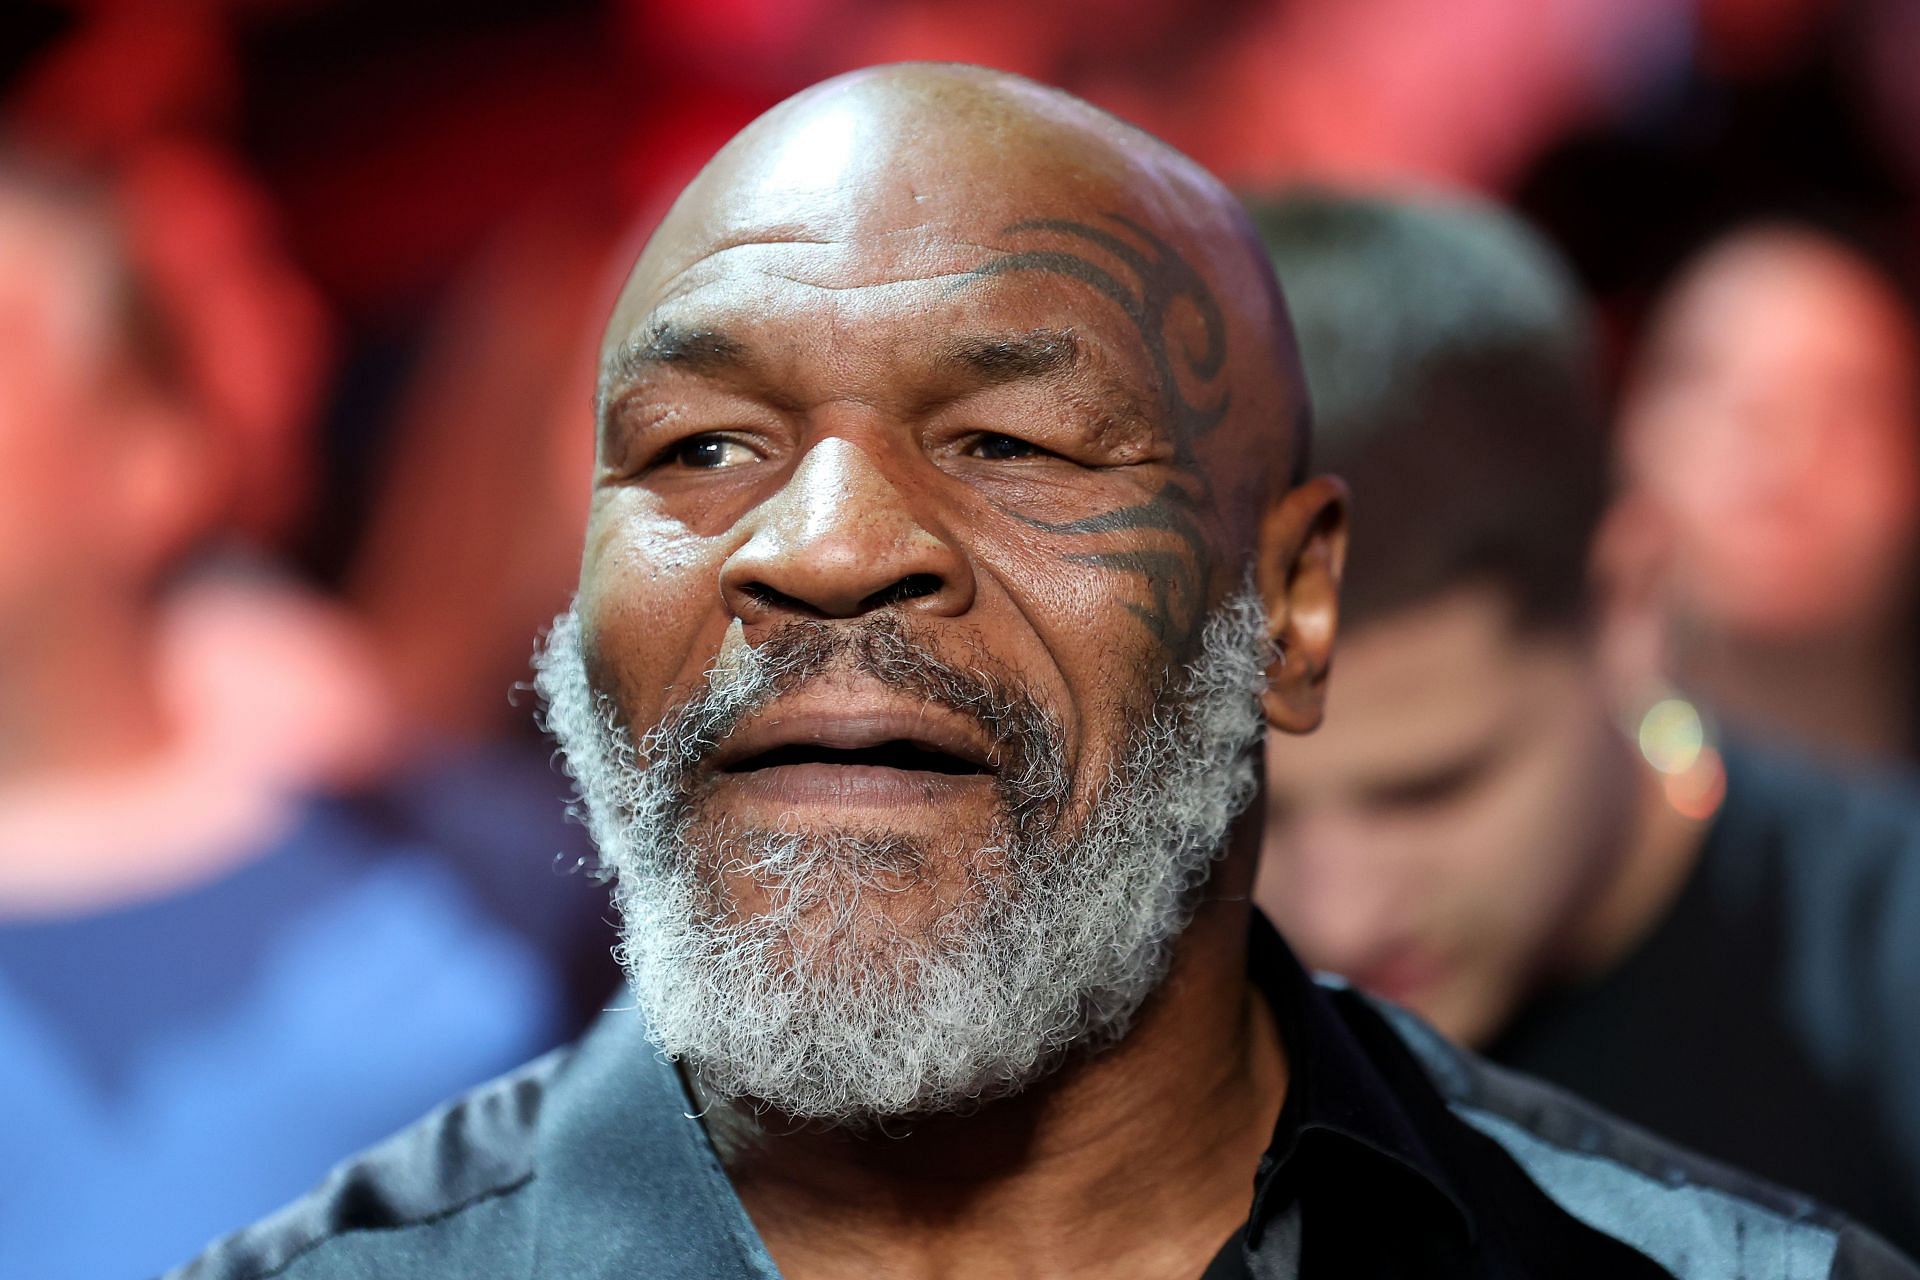 What did Mike Tyson go to prison for?